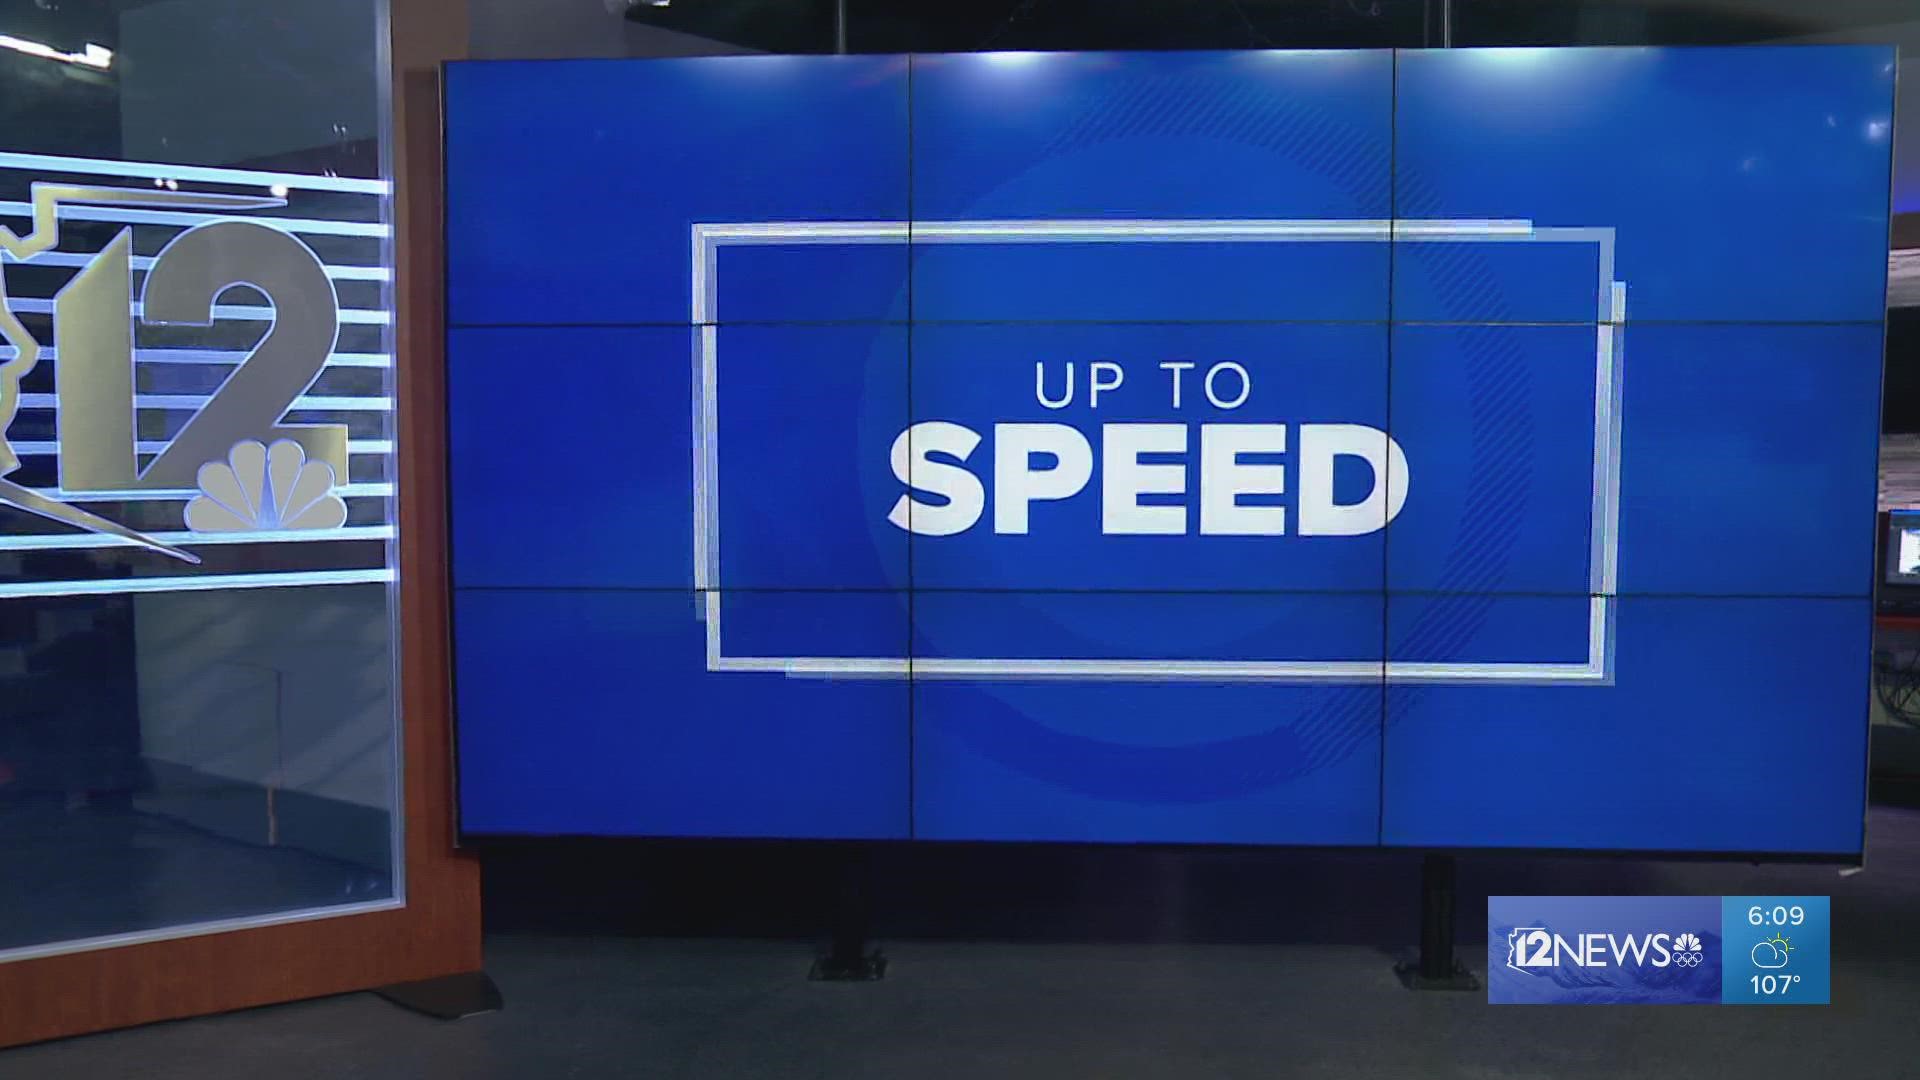 Let's get you "Up To Speed" this Sat. 9/11/21.